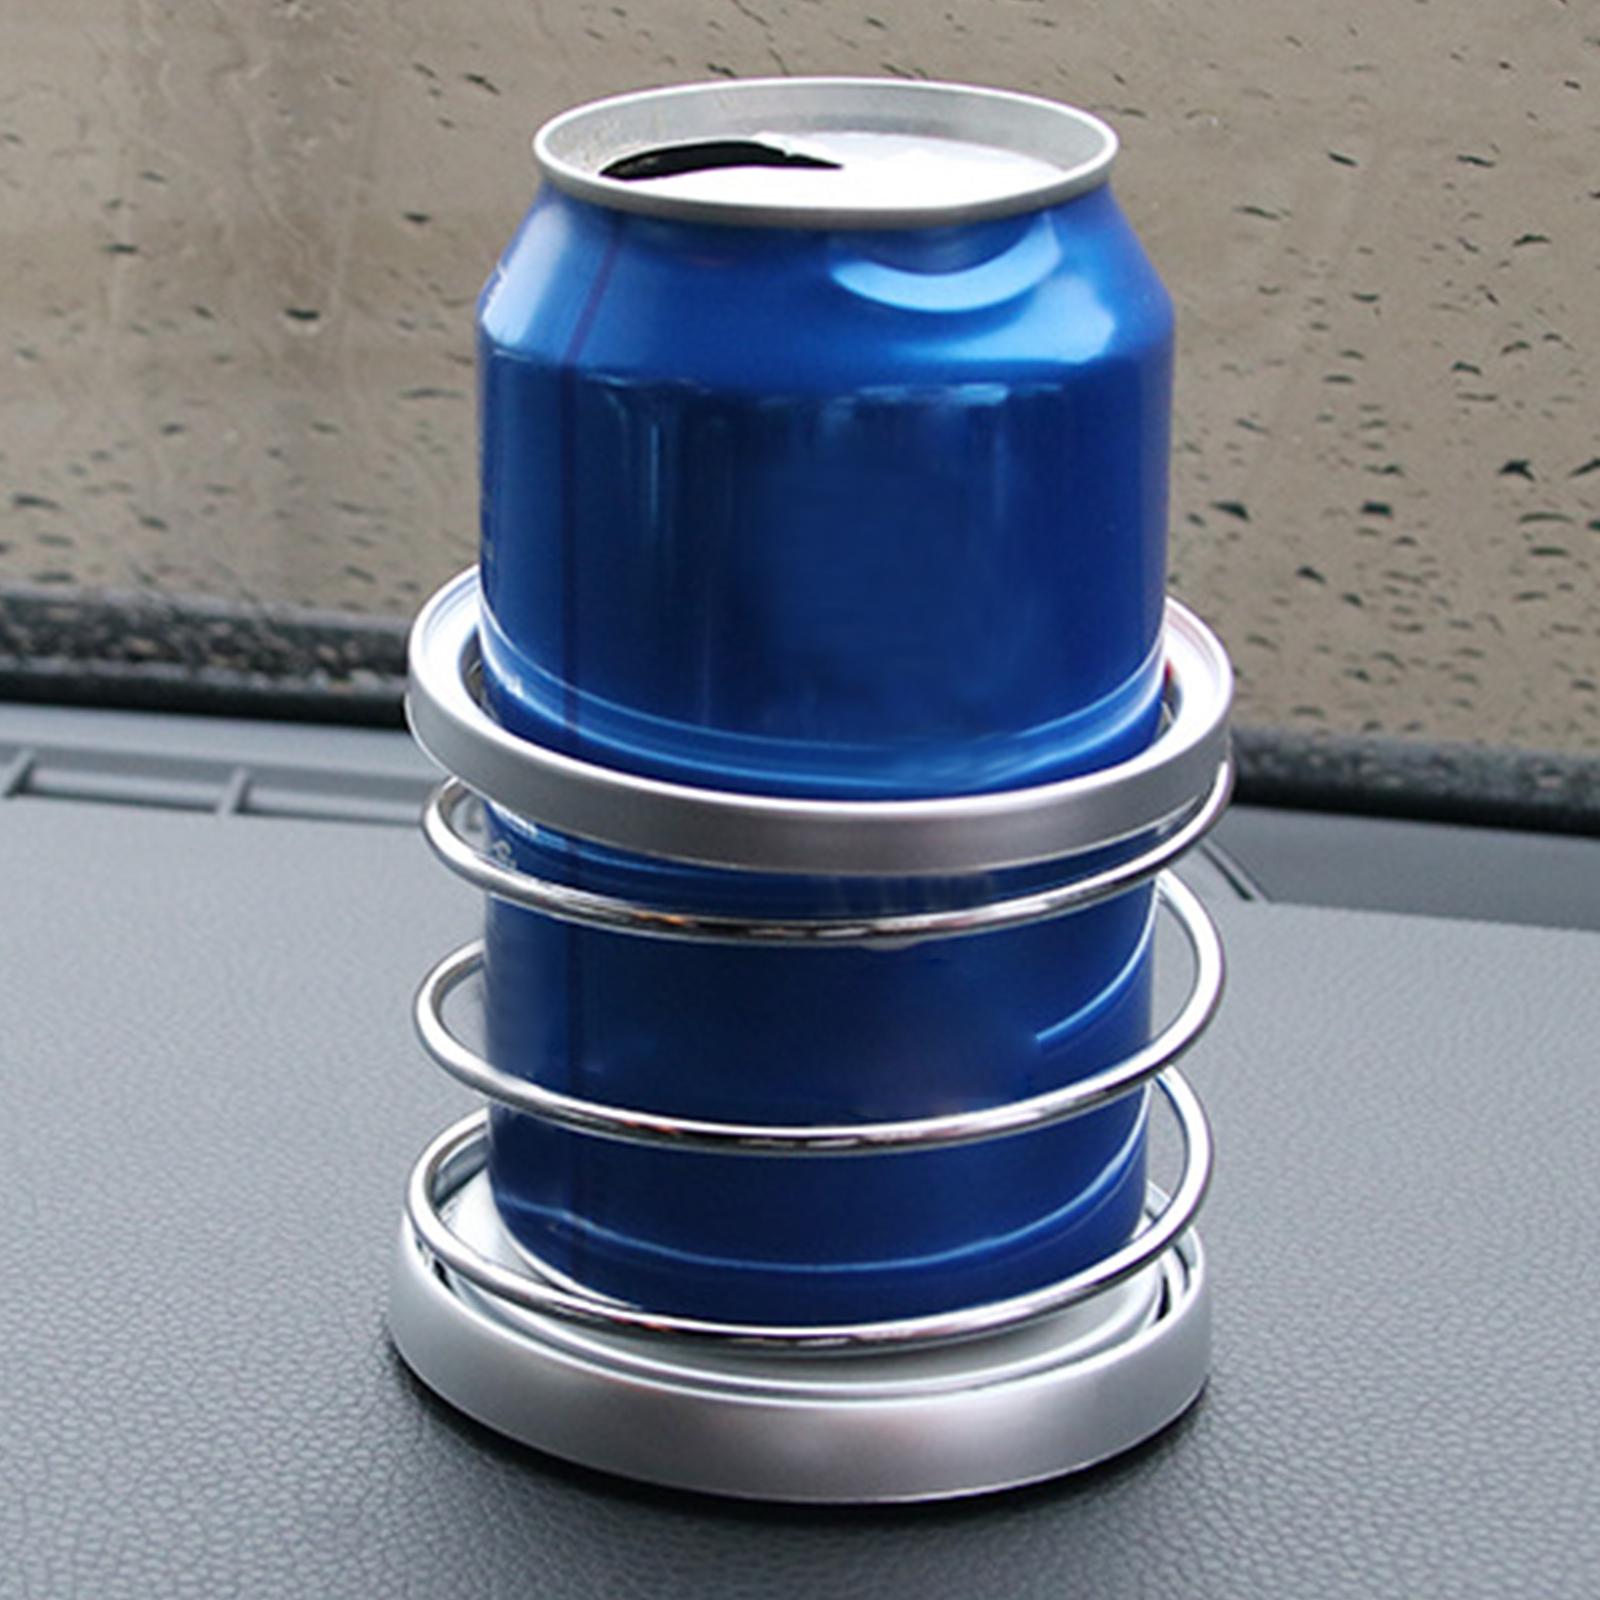 Auto Car Drinks Holder Phone Mount Stand Spring Steel Wire Cup Holder Silvery